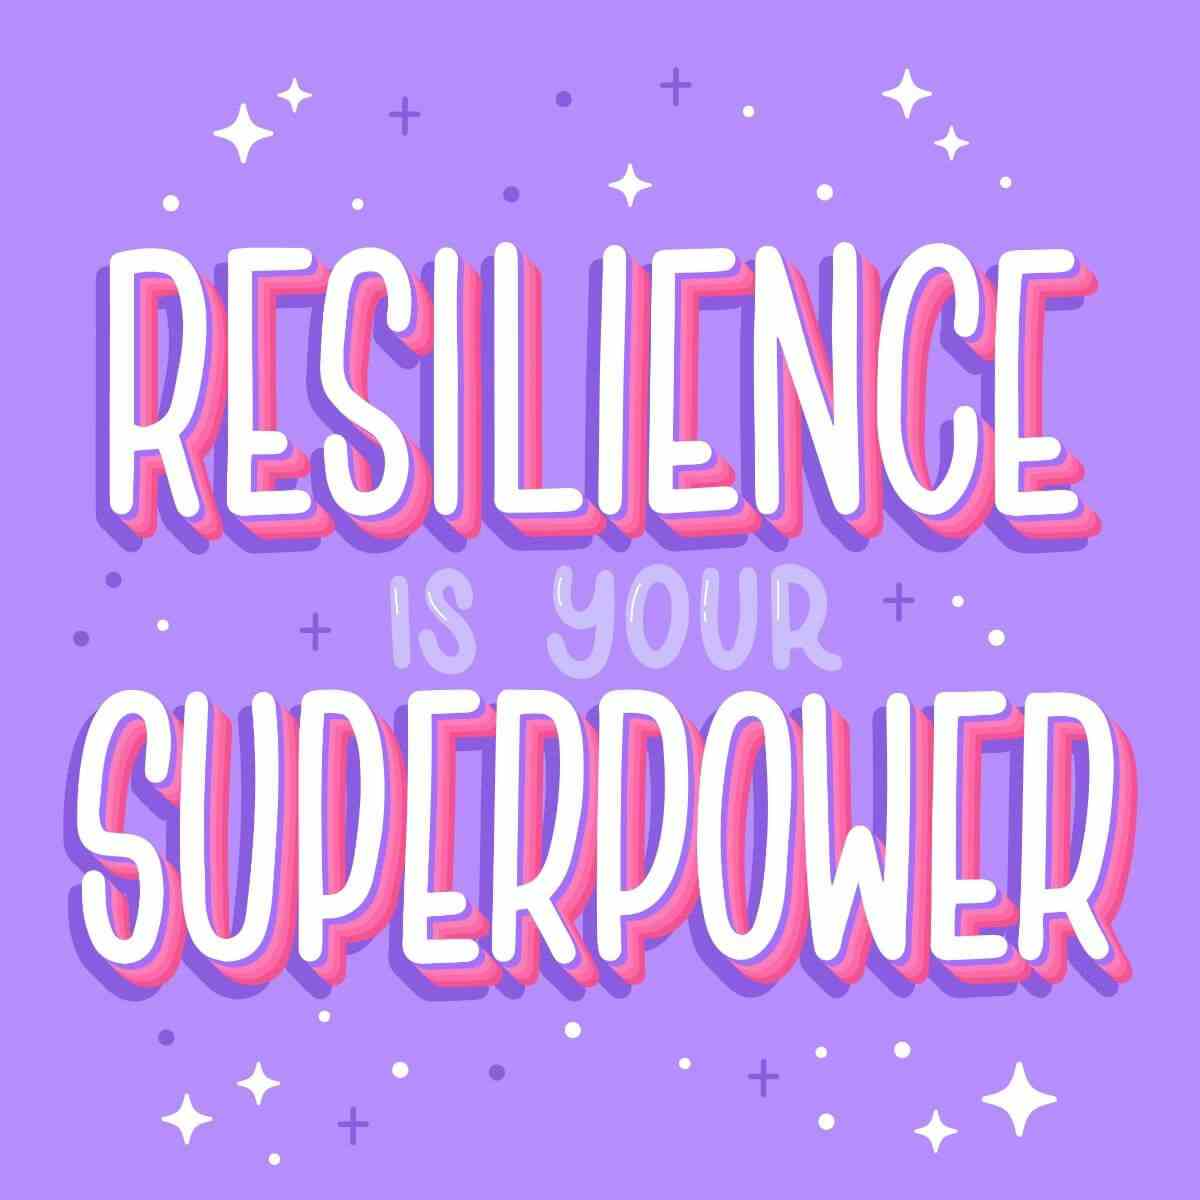 Card Resilience is your superpower